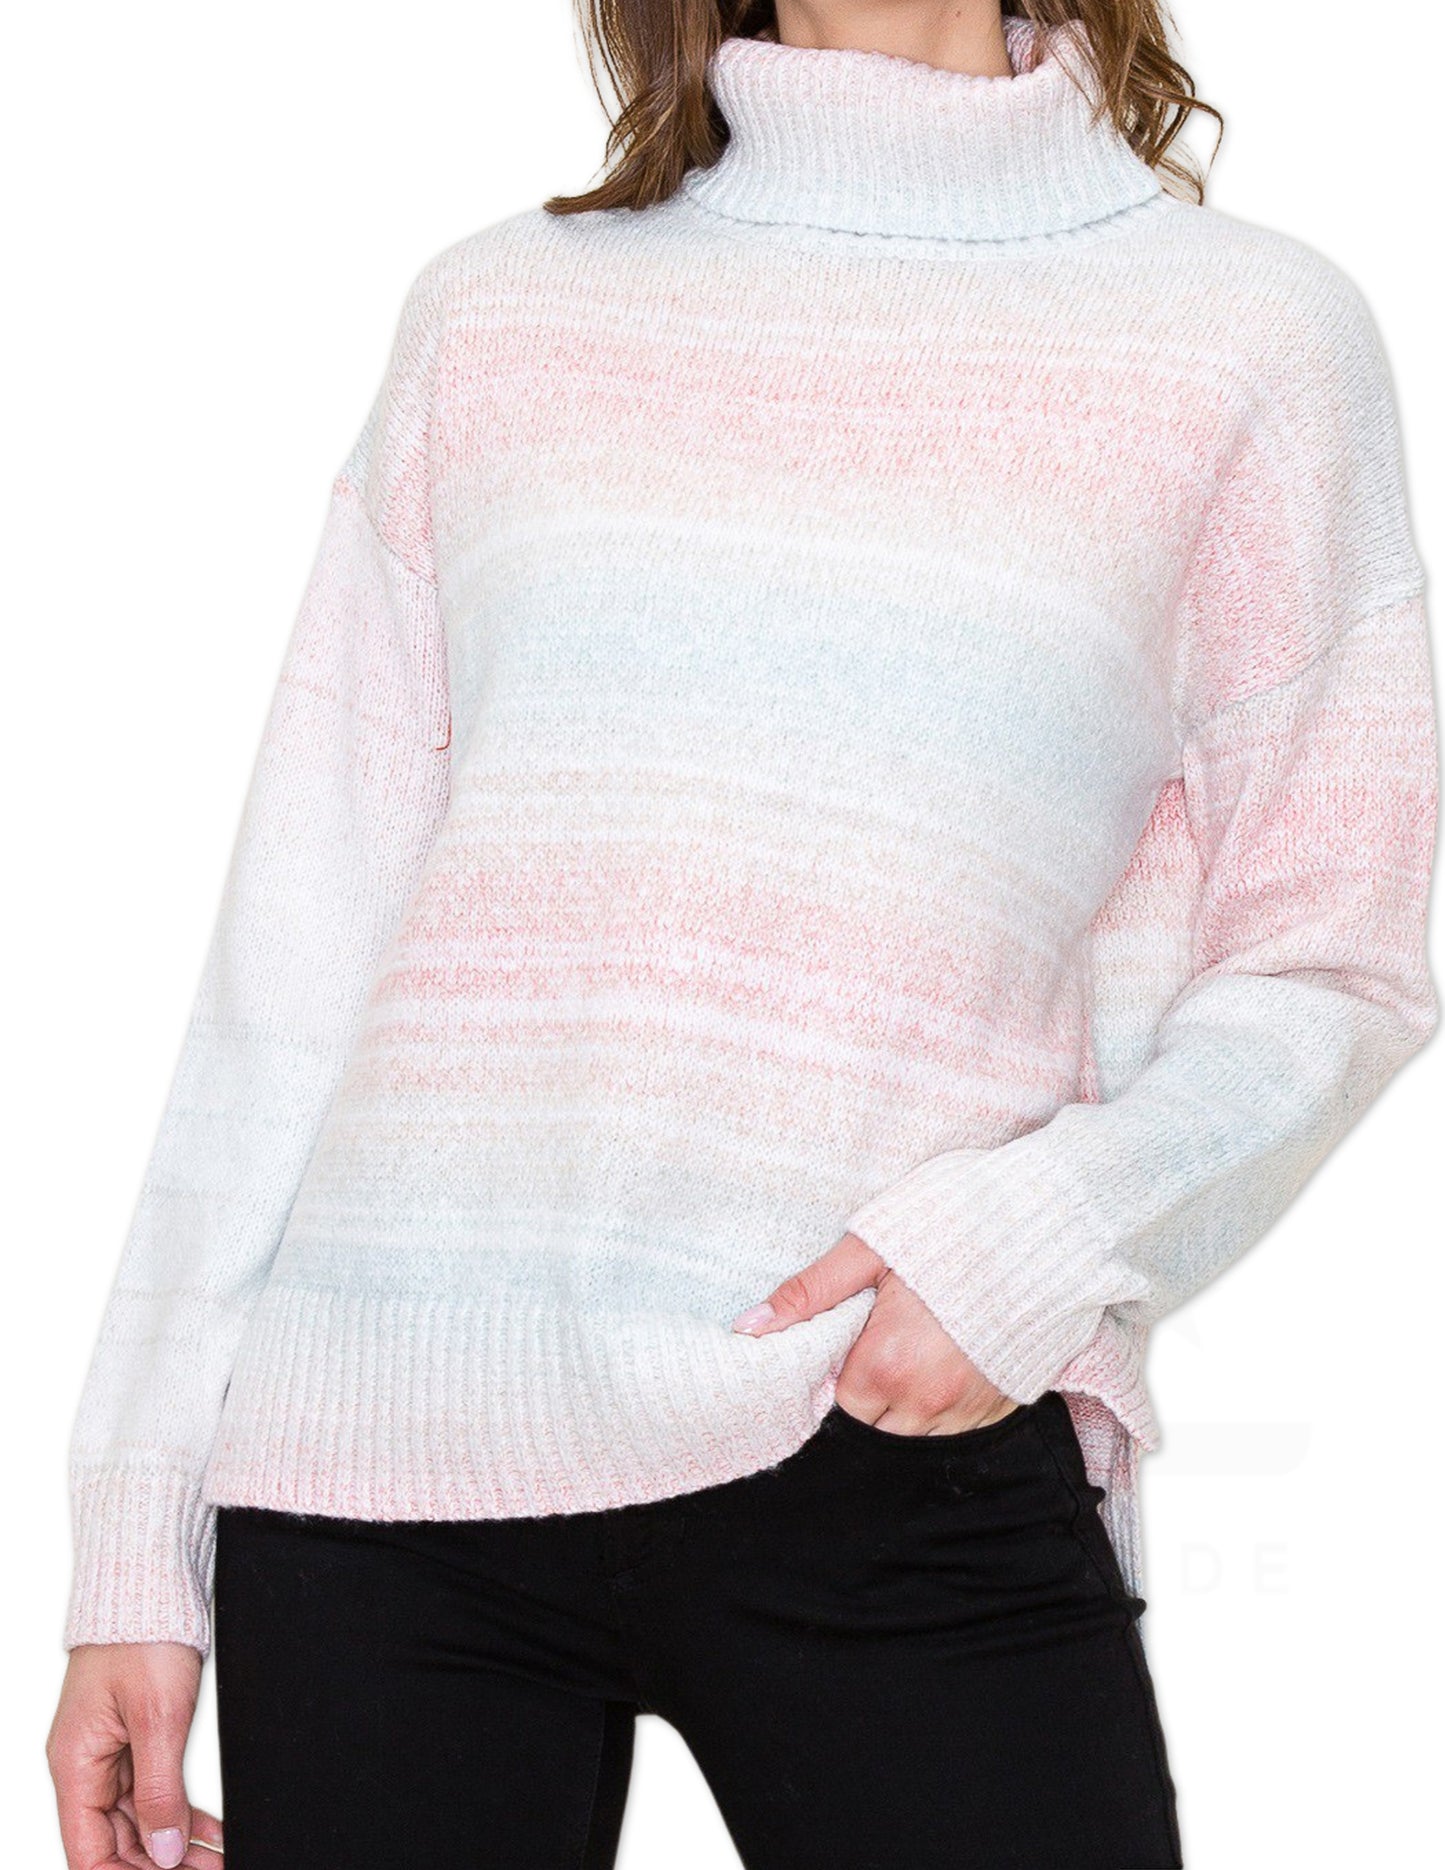 Ombre Turtleneck Sweater - Pink and Taupe